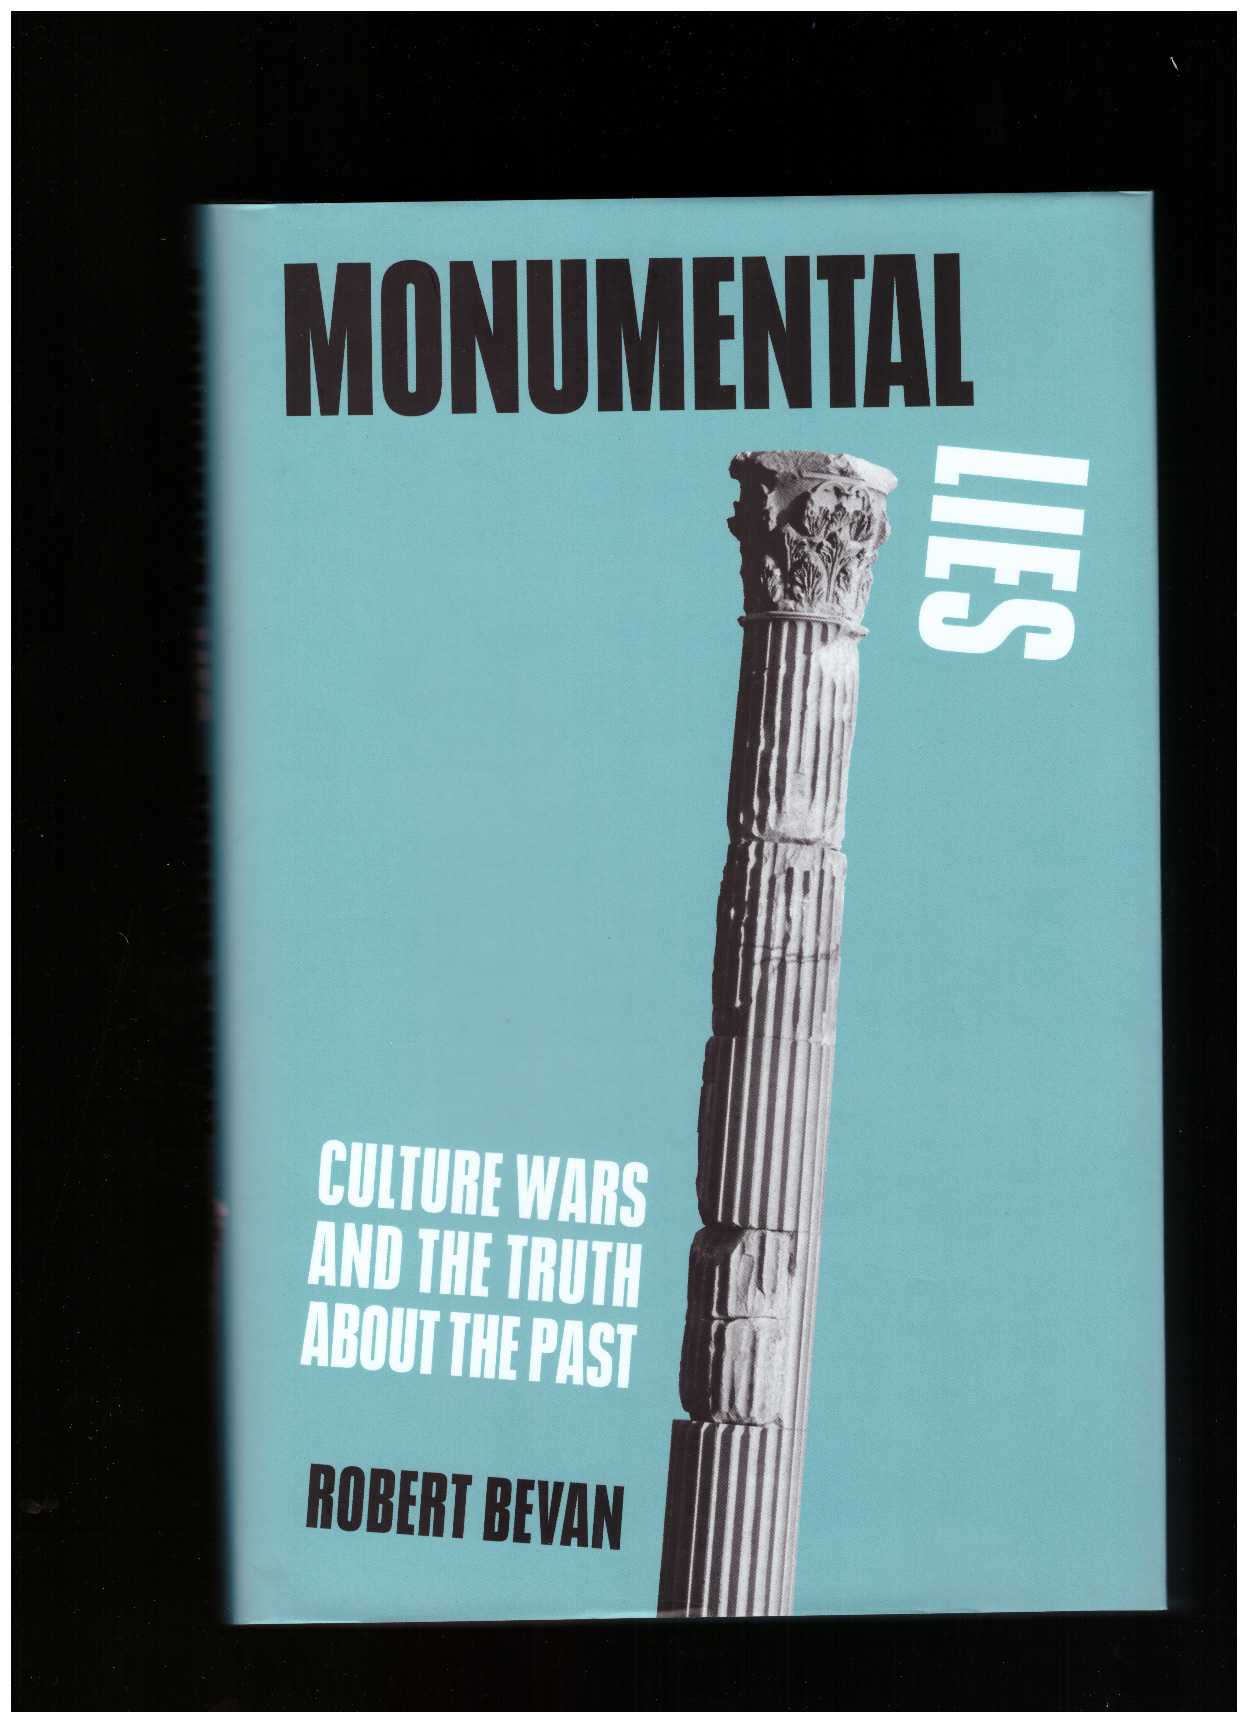 BEVAN, Robert - Monumental Lies. Culture Wars and the Truth about the Past